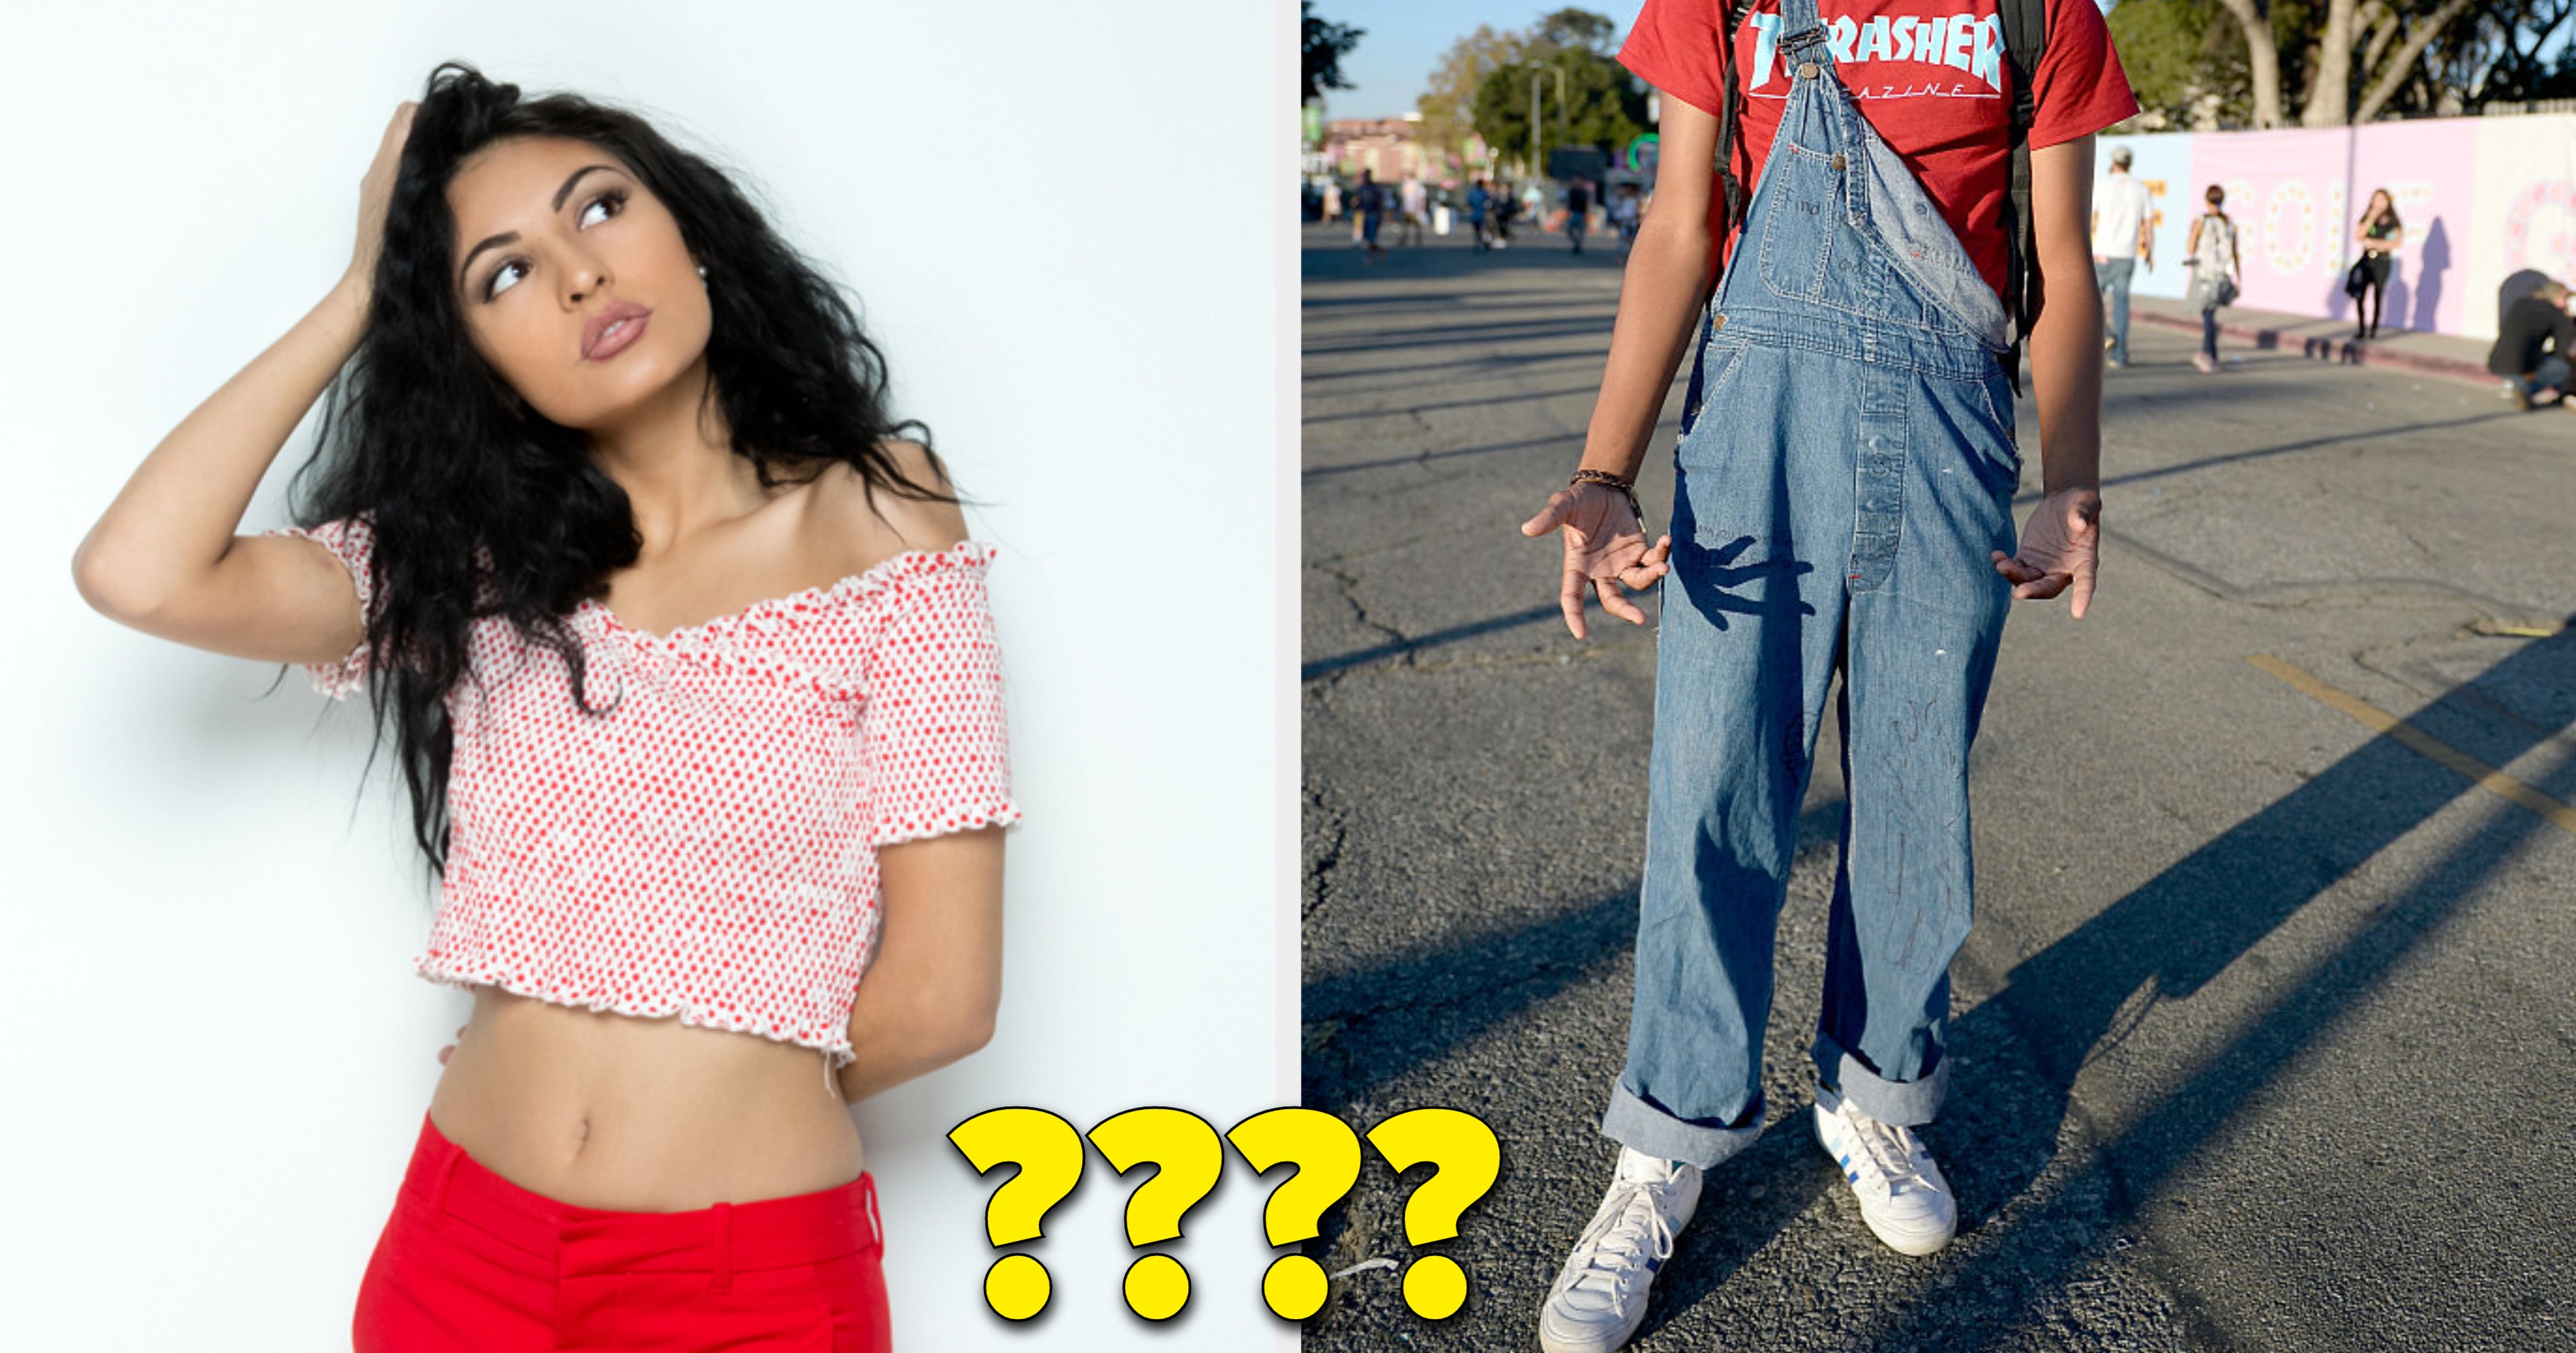 What are your thoughts on Gen Z fashion? : r/Zillennials